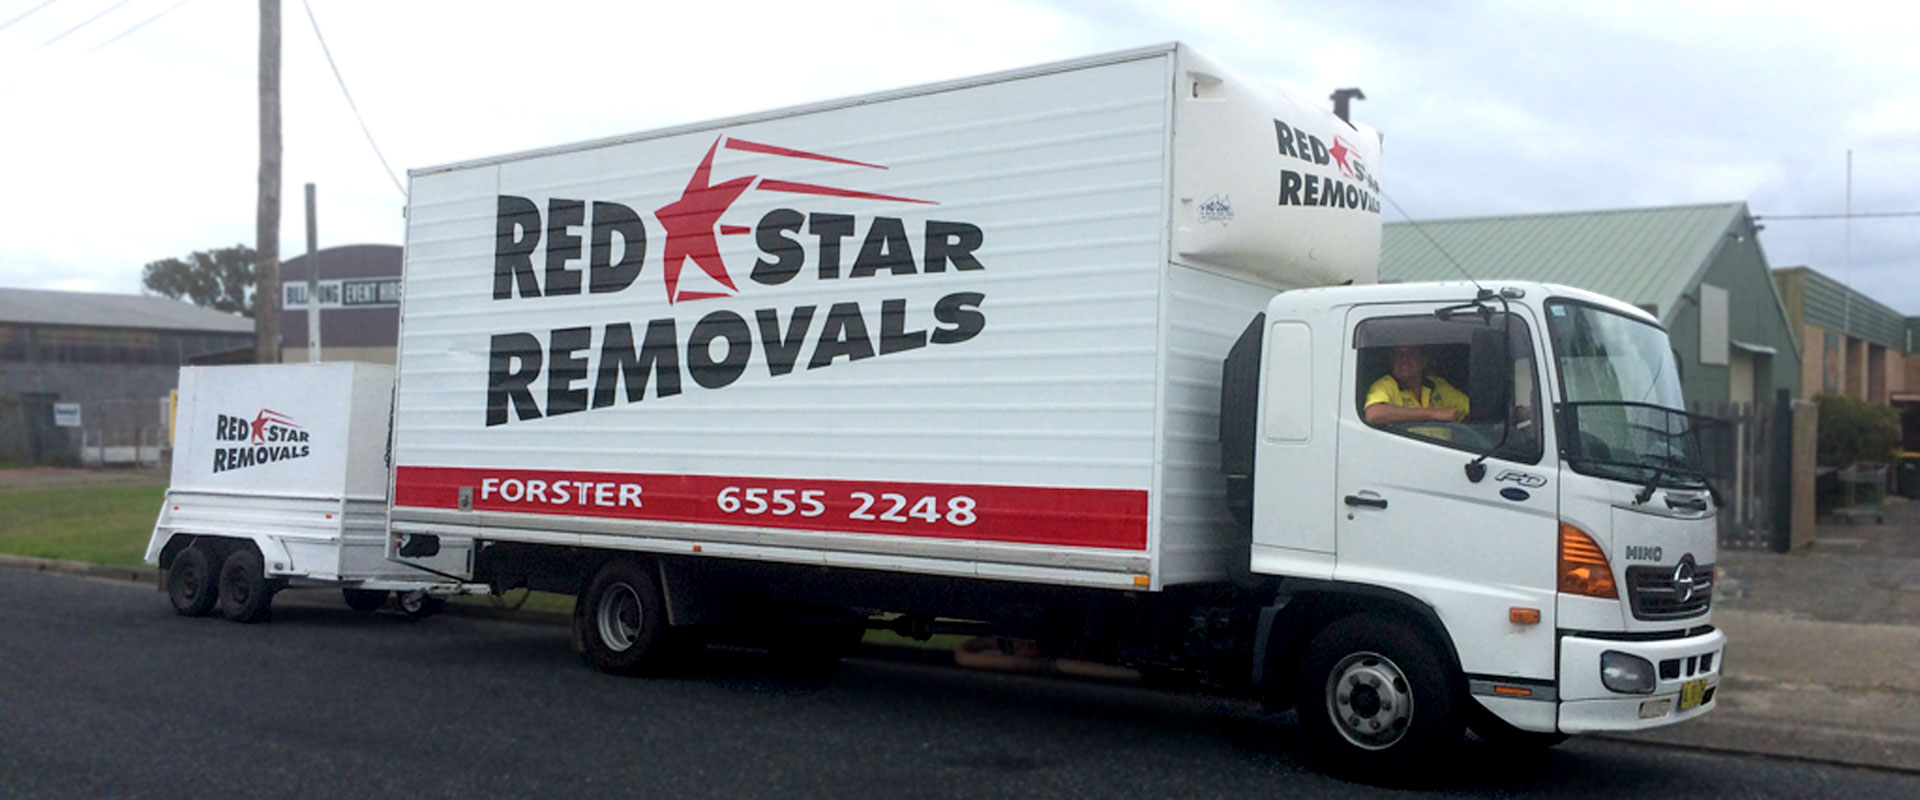 Red Star Removals